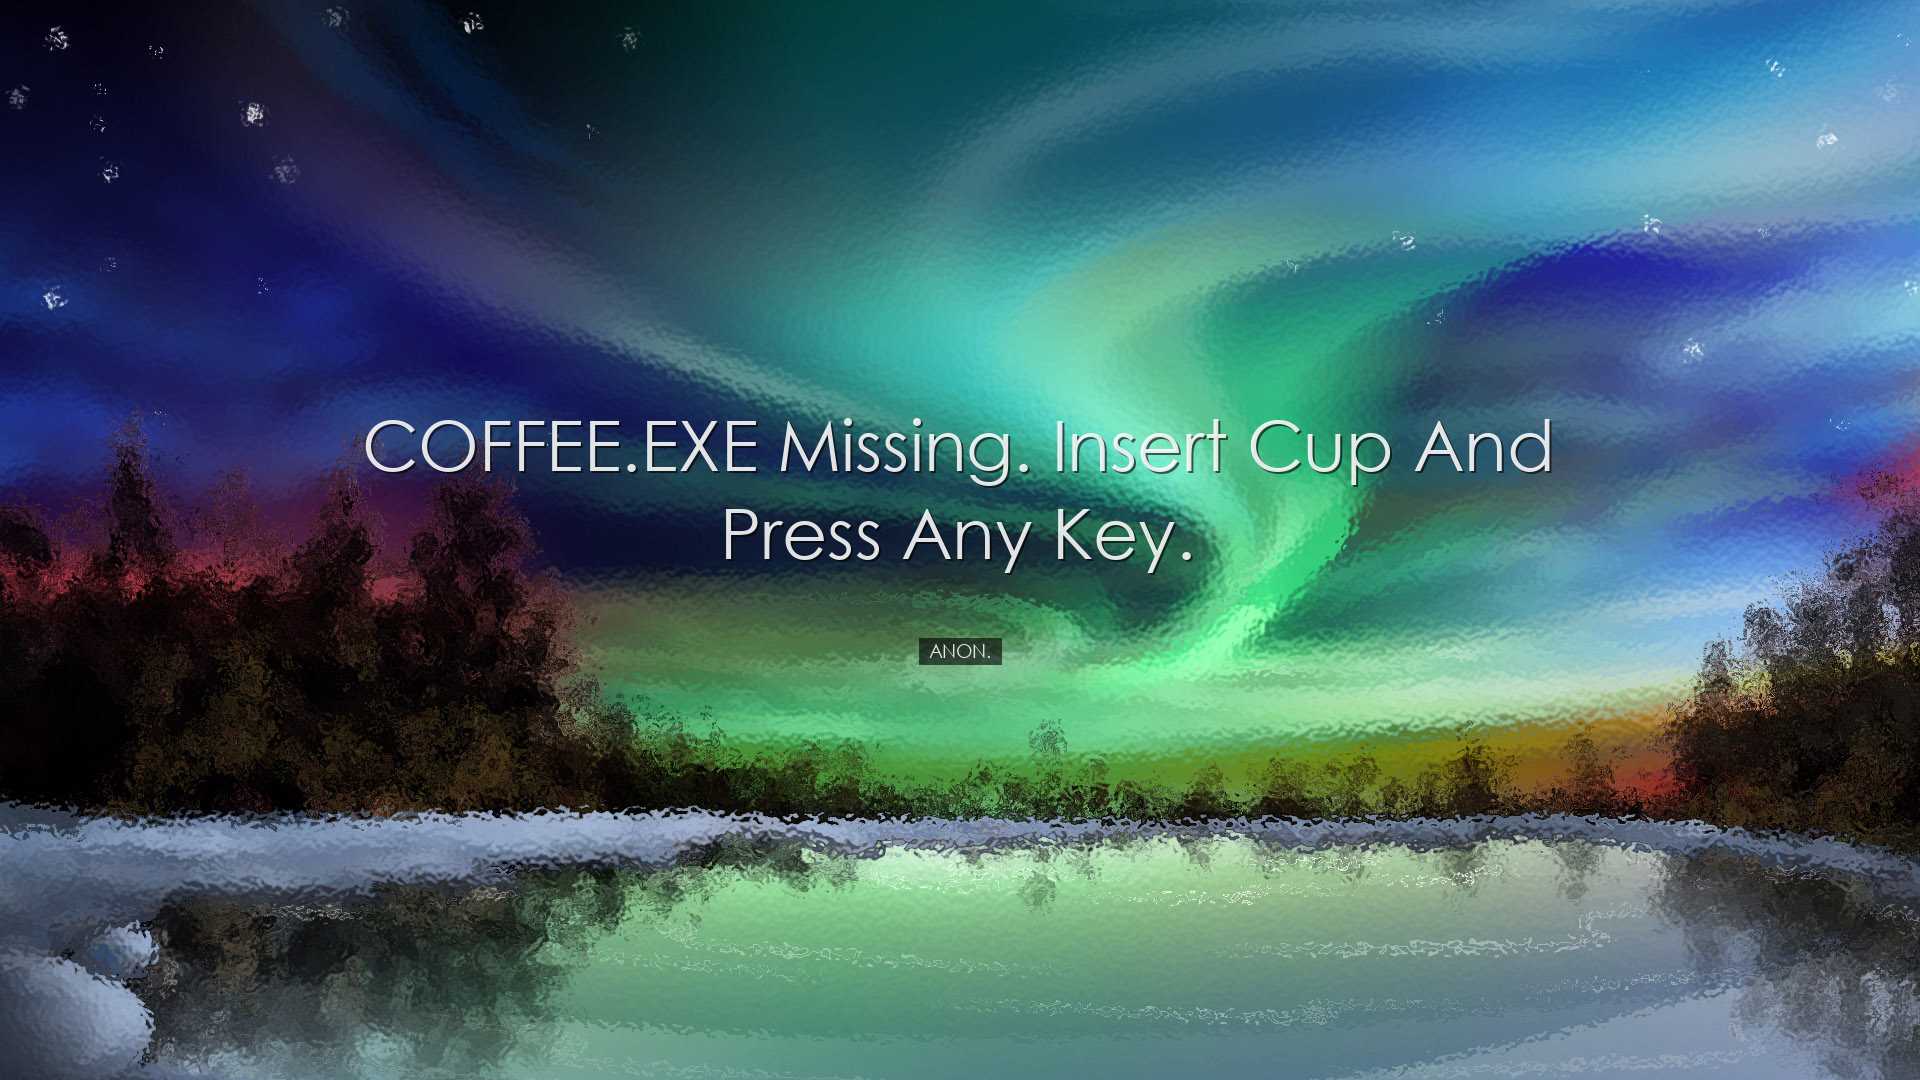 COFFEE.EXE missing. Insert cup and press any key. - Anon.